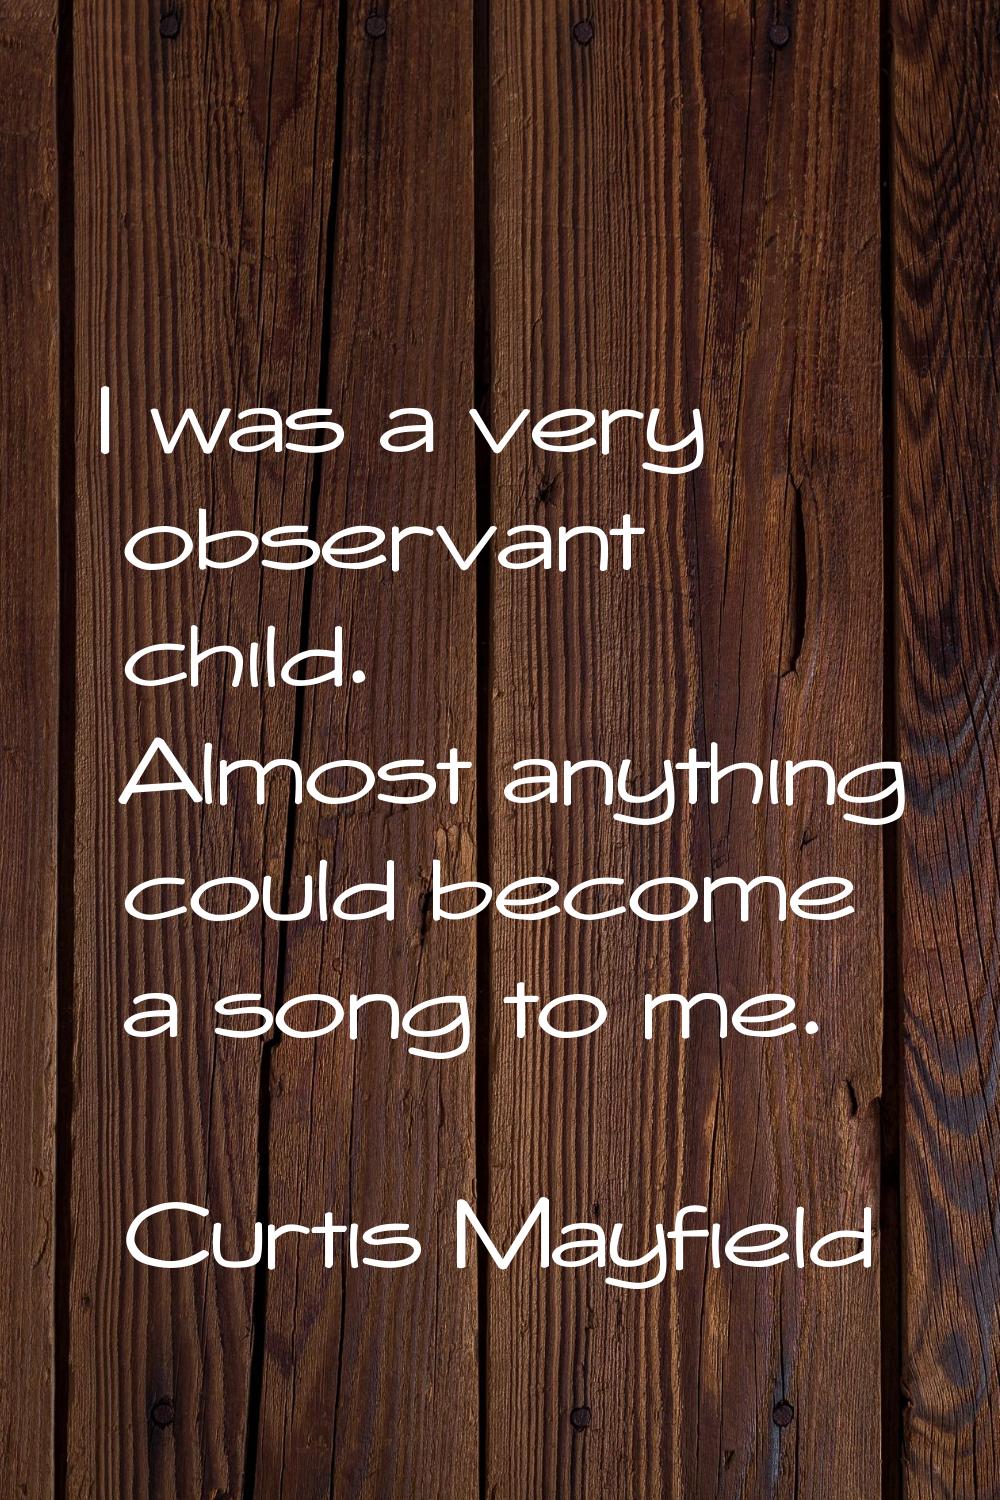 I was a very observant child. Almost anything could become a song to me.